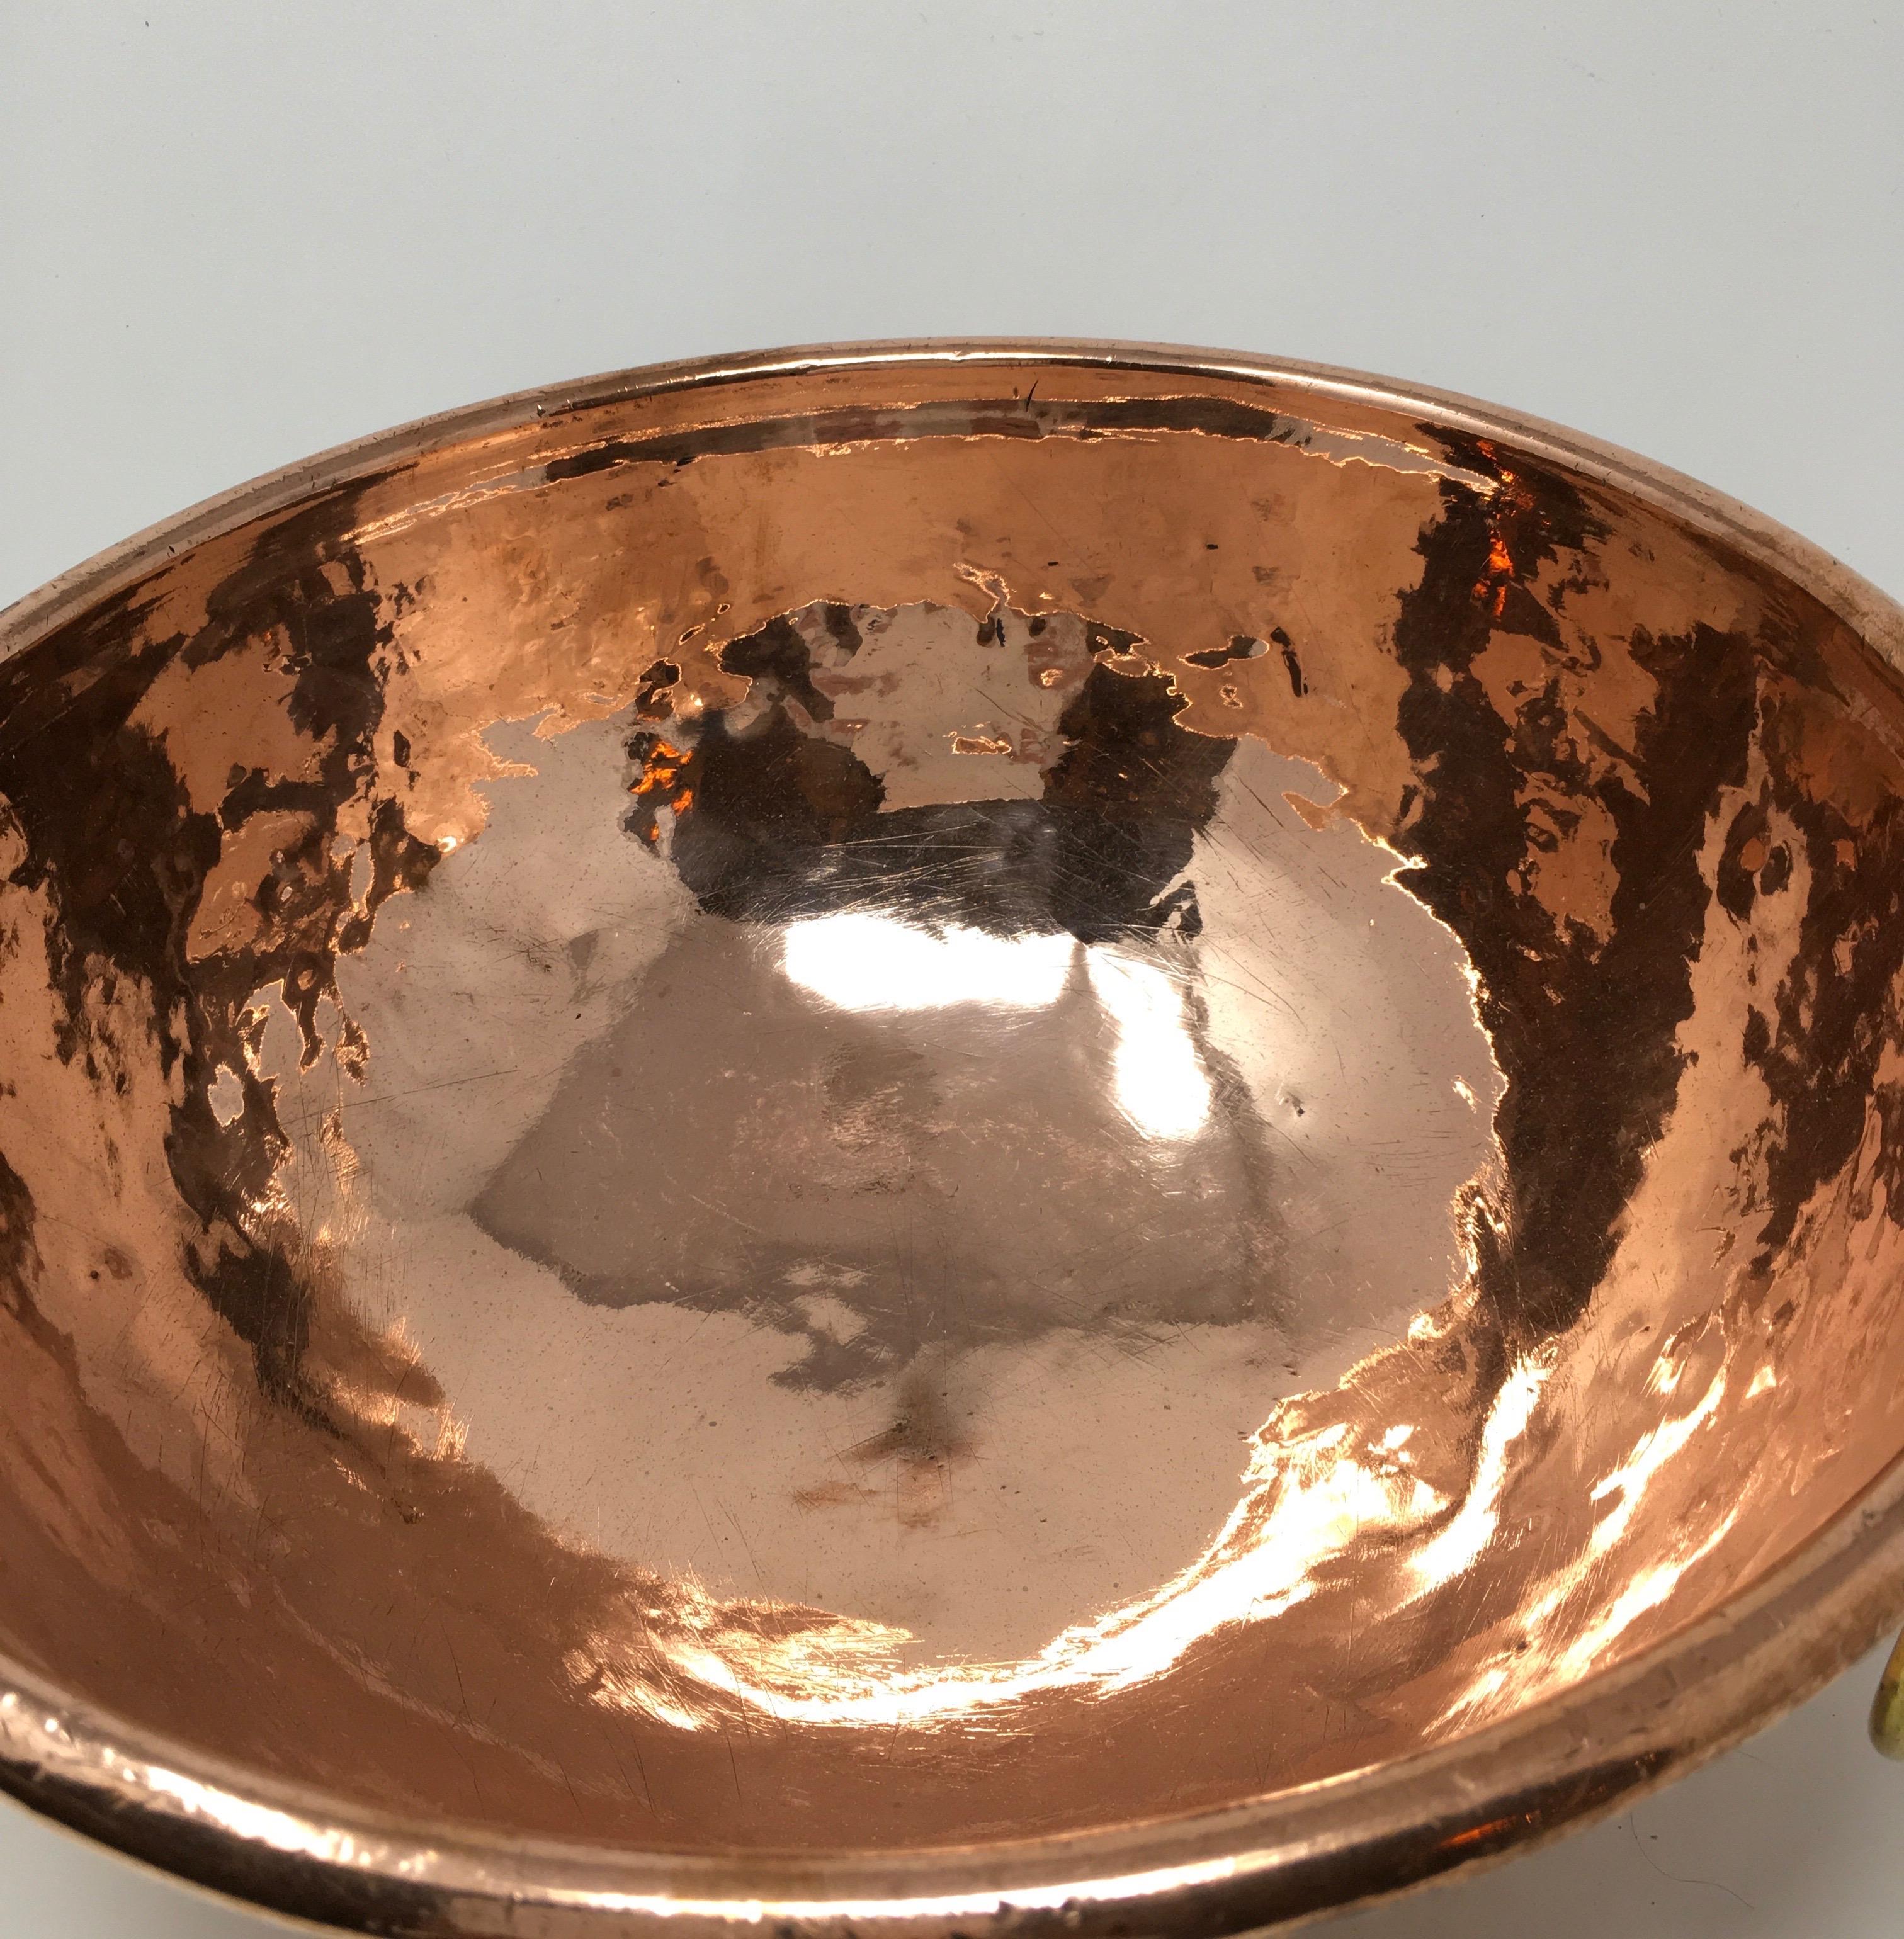 Large copper mixing bowl with brass loop handle. Found in England. This beautiful copper bowl will make a nice addition to any kitchen decor. 

This piece weighs 4.5 lbs.